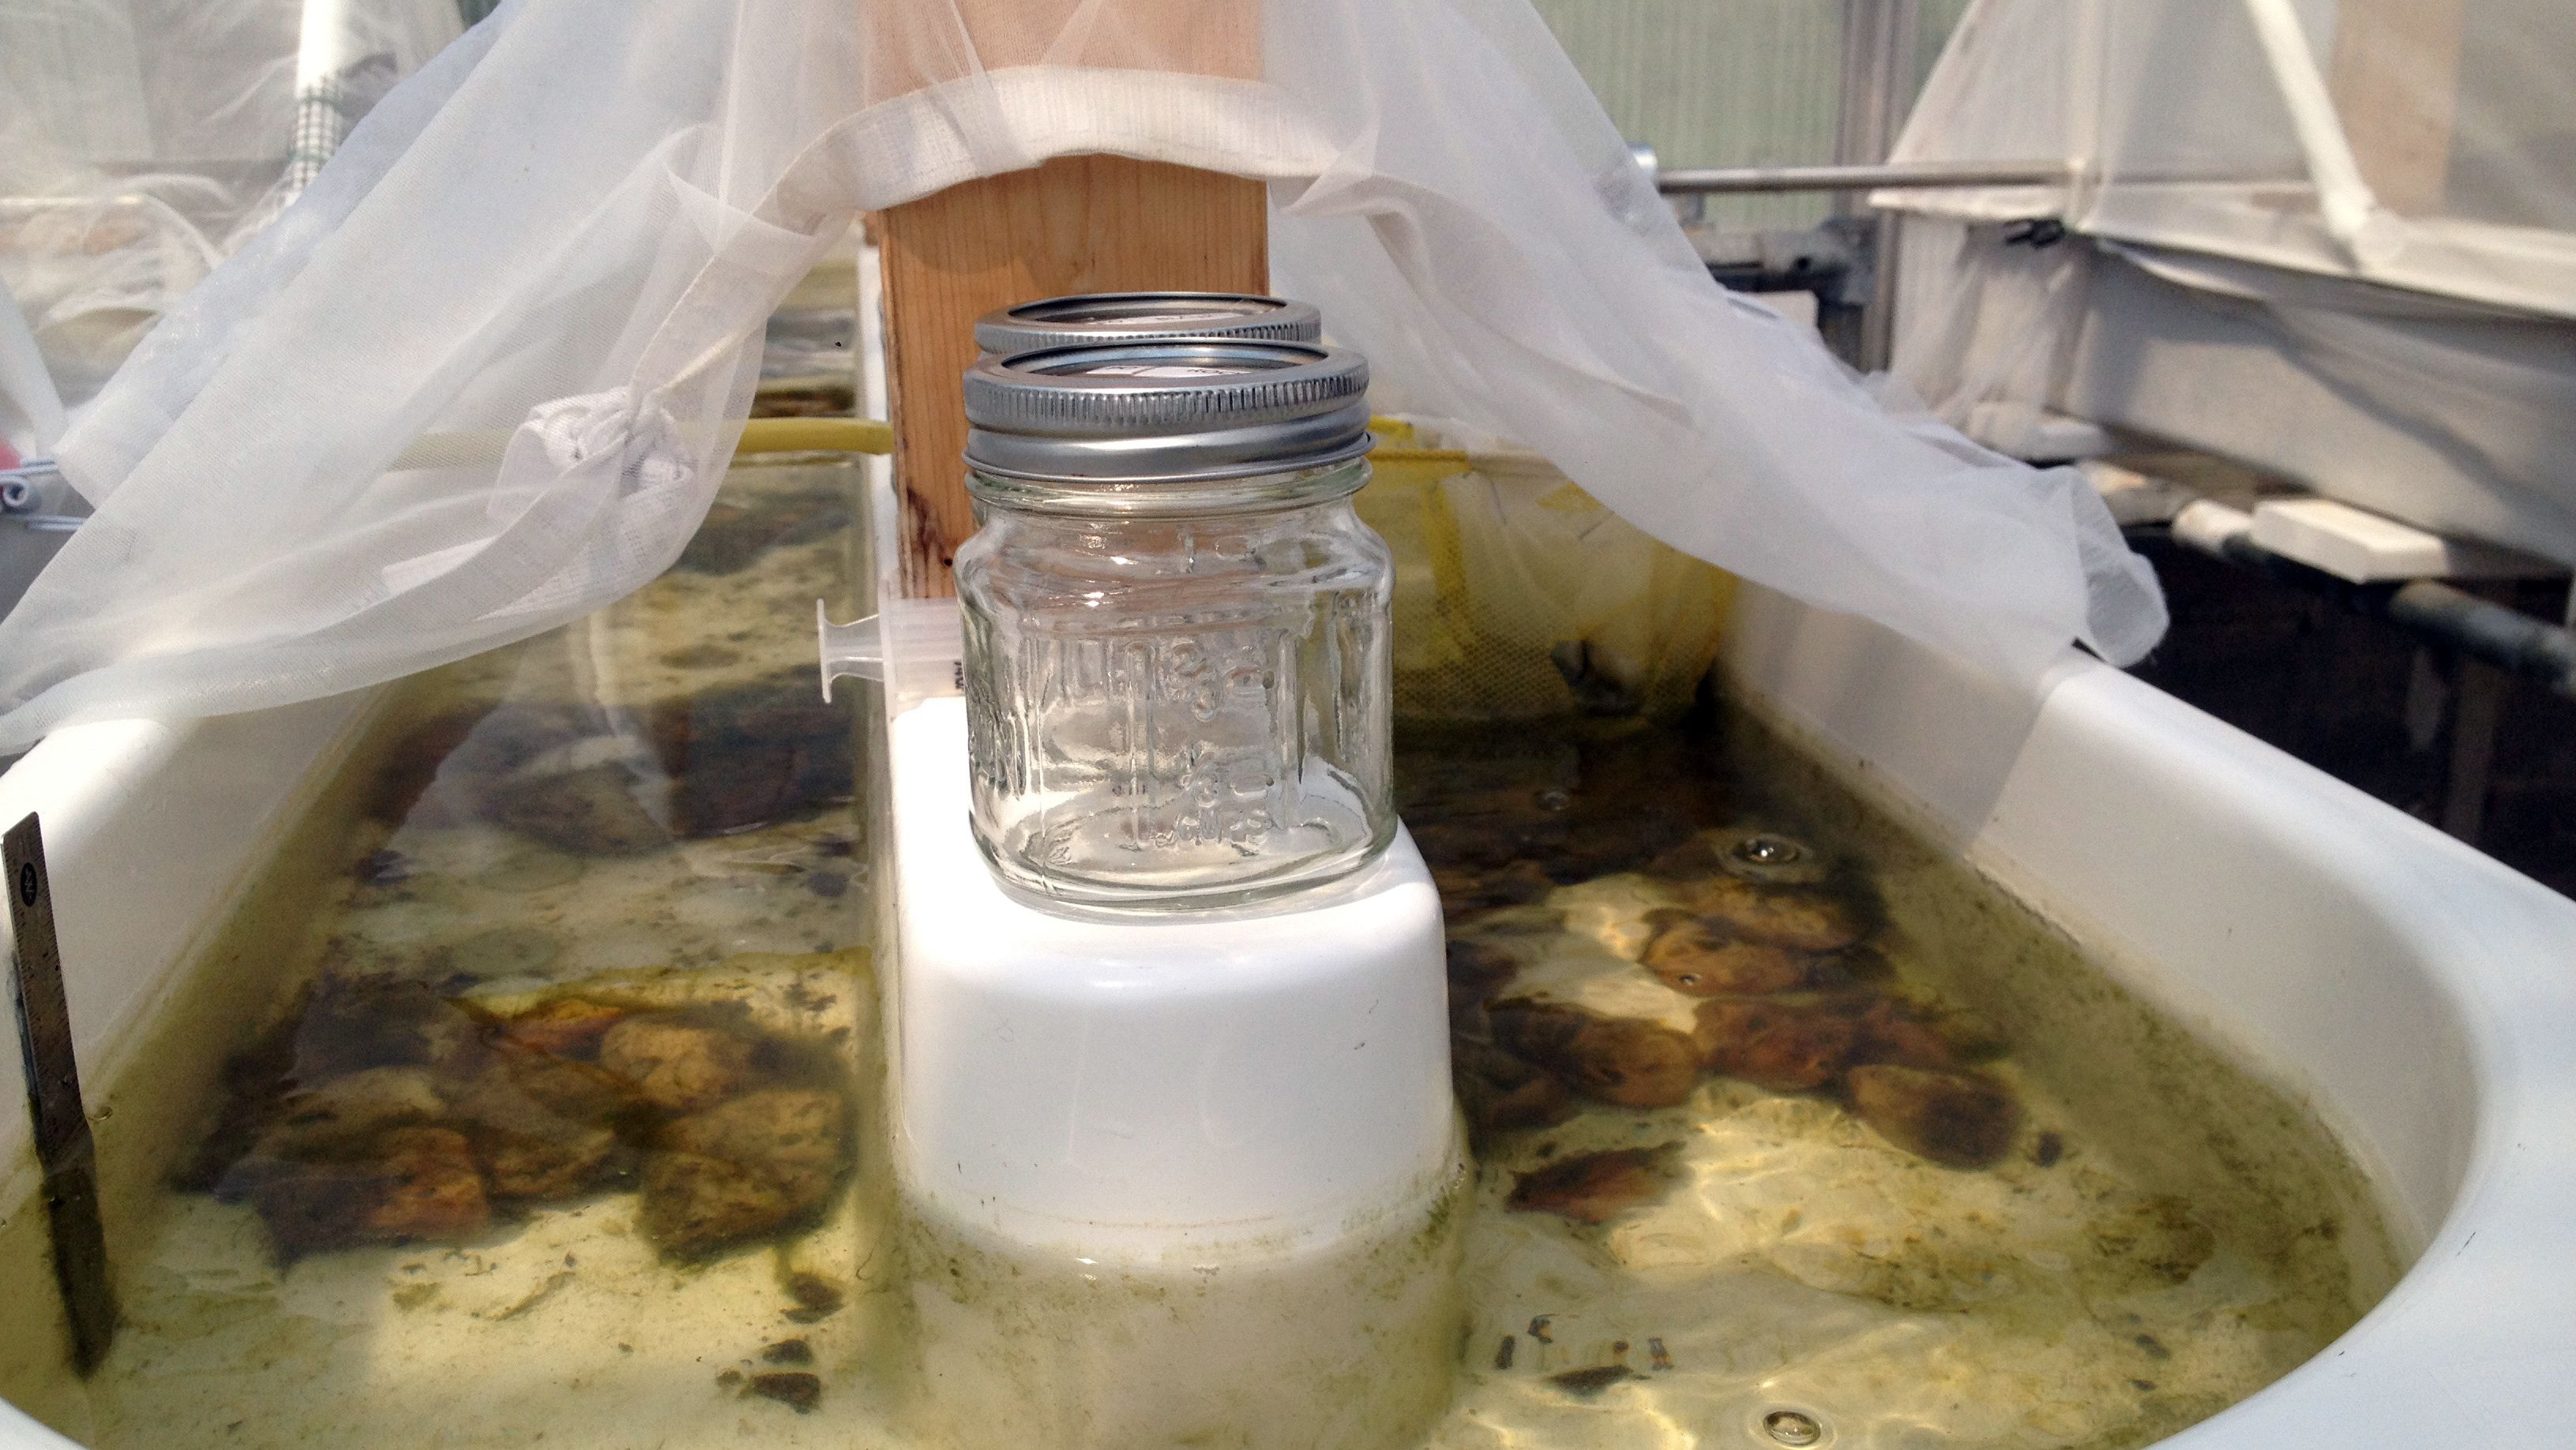 In one of the artificial streams, jars were used to measure the rate of organisms' oxygen production and consumption.